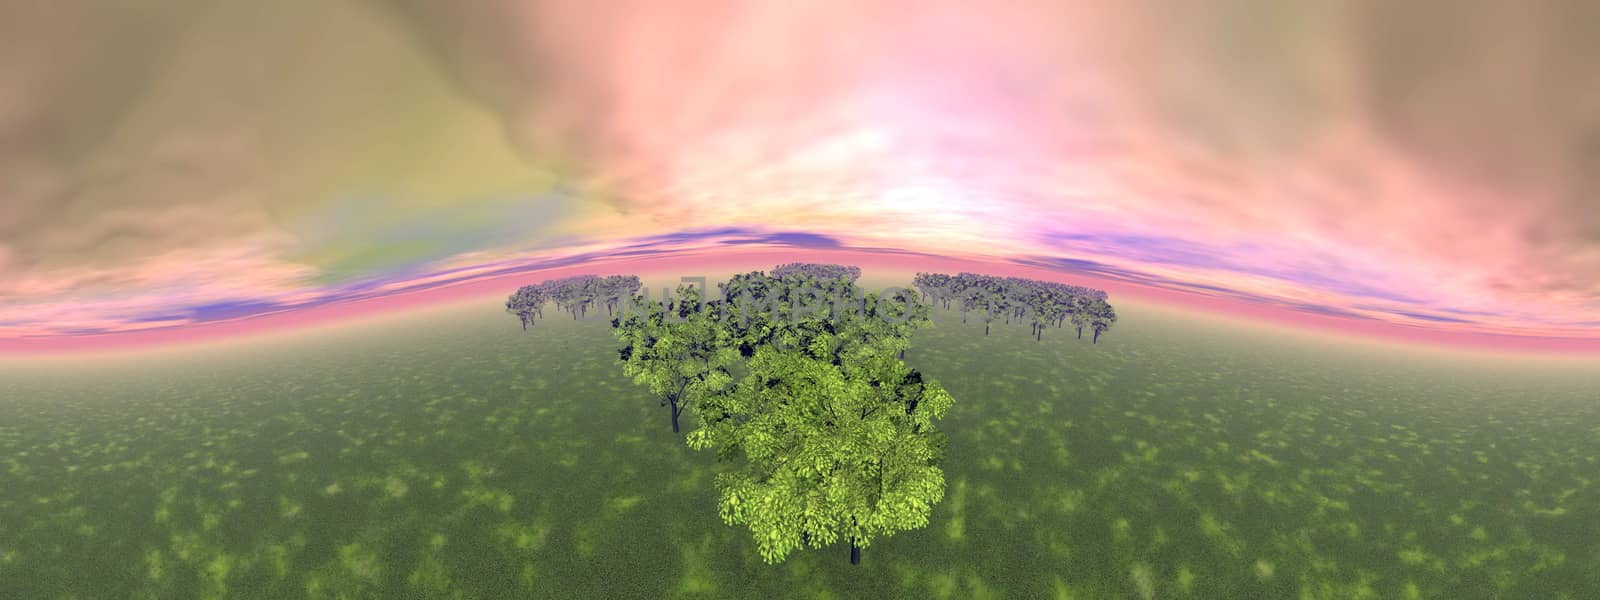 Forests - 3D render by Elenaphotos21